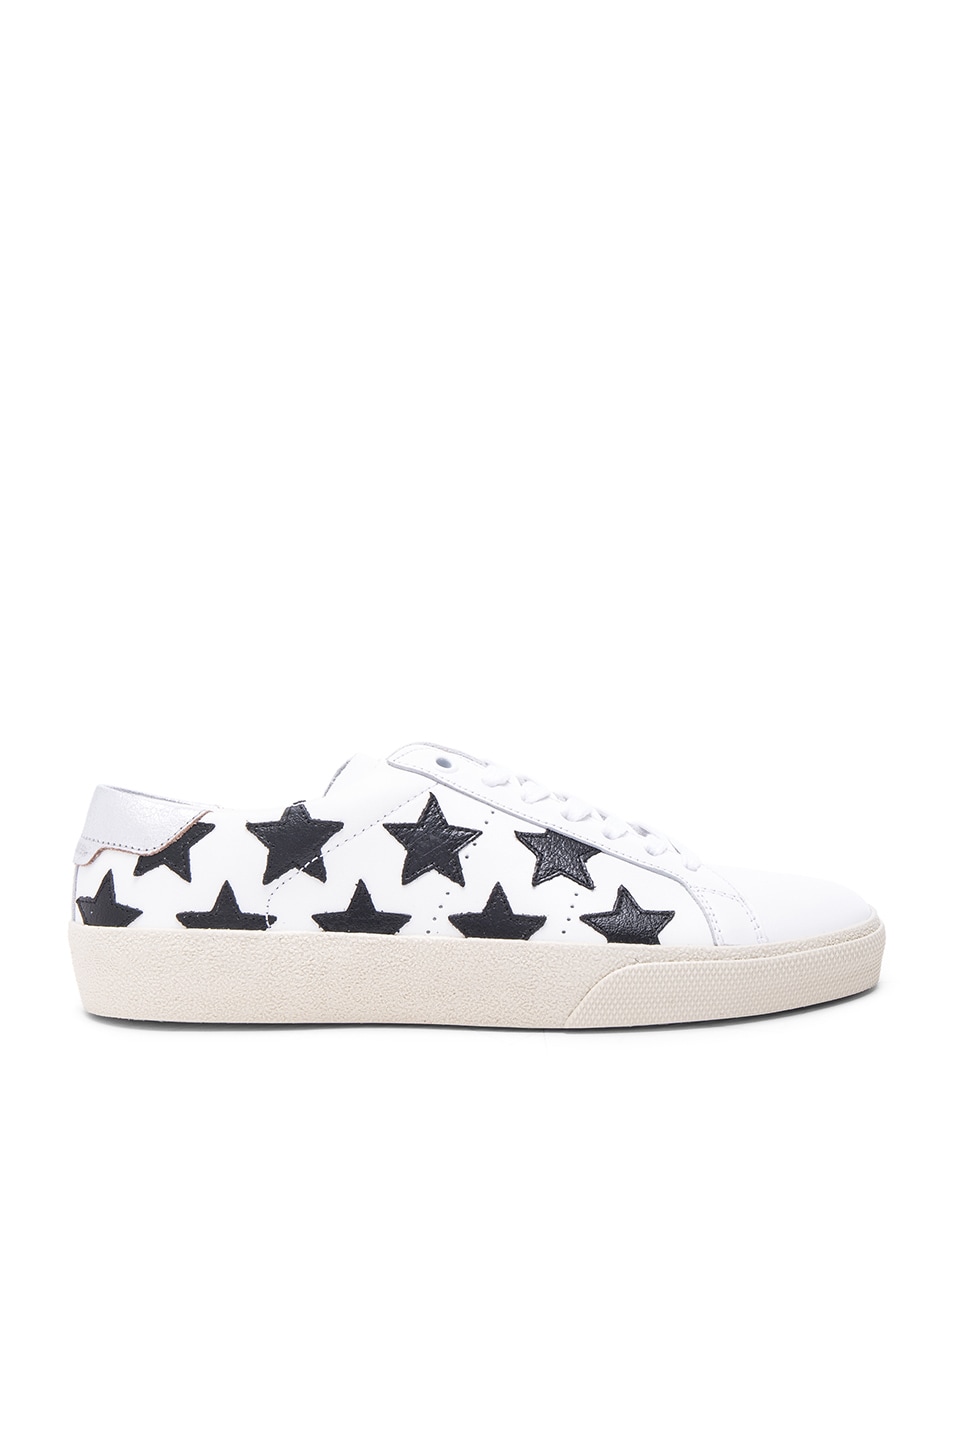 Image 1 of Saint Laurent Court Classic Star Leather Sneakers in Black & White